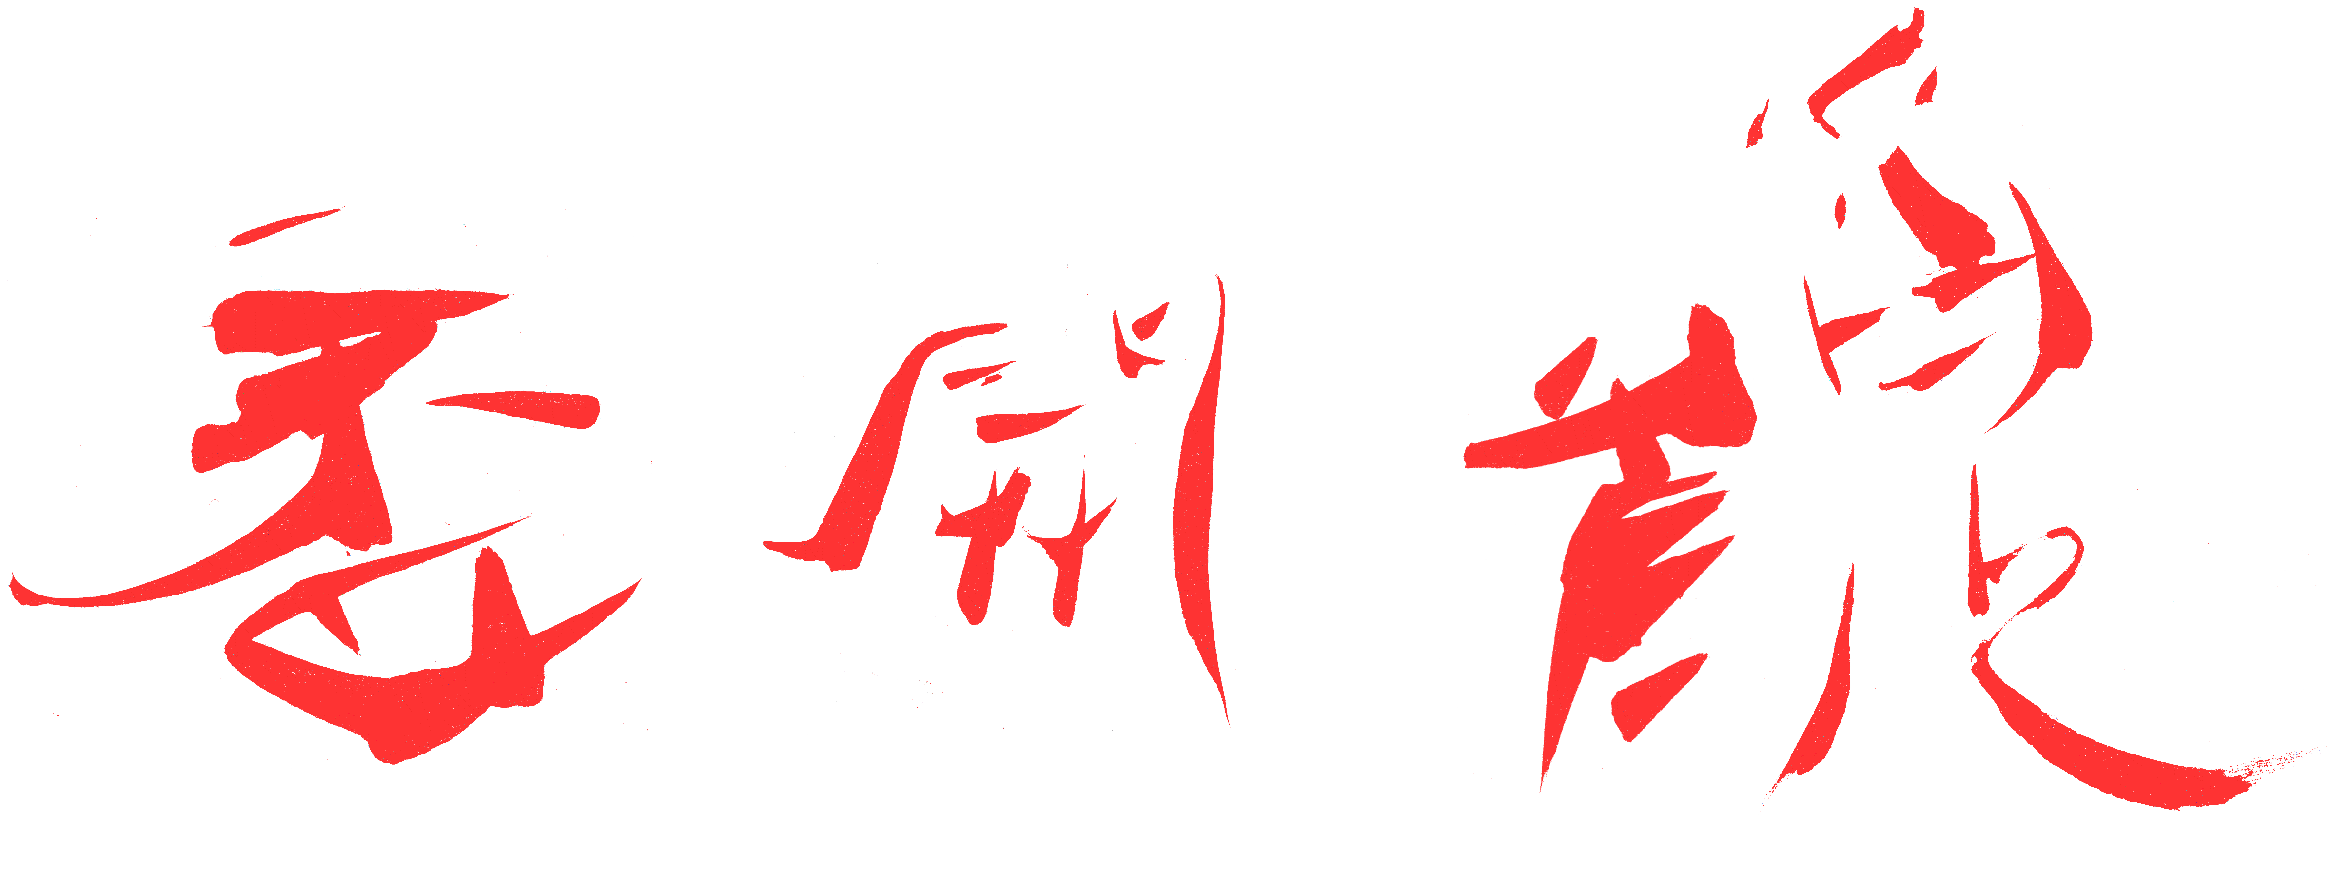 Qi Hong (Sai Koh) 's freehand brushwork style semi-seal script Chinese calligraphy: Utterly Happy 2, image with transparent background - Qi Hong (Sai Koh) Transparent Background Image Web